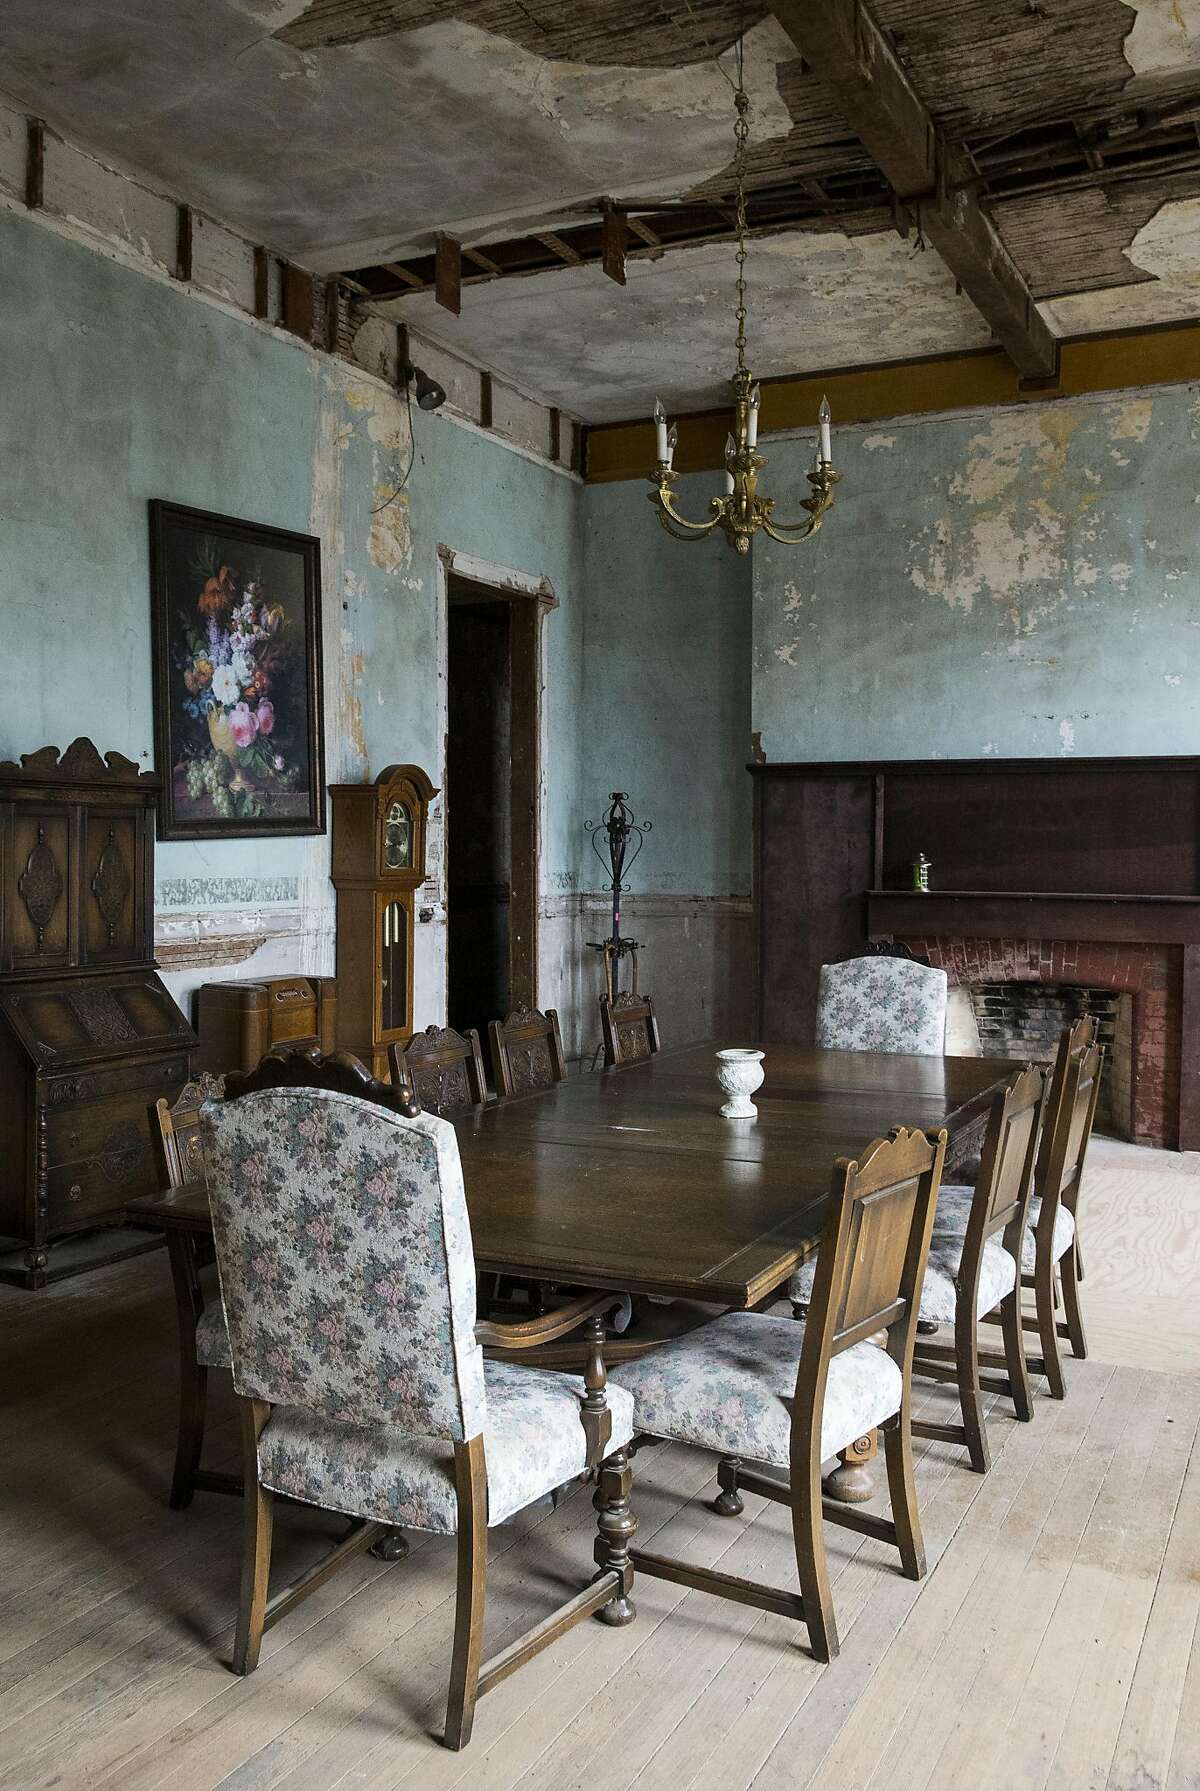 A staff dining room is seen at Preston Castle in Ione, Calif, on Monday, February 20, 2017. The historic building was originally used for the Preston School of Industry, a reform school. During the months of April through August the building opens on scheduled days for tours.